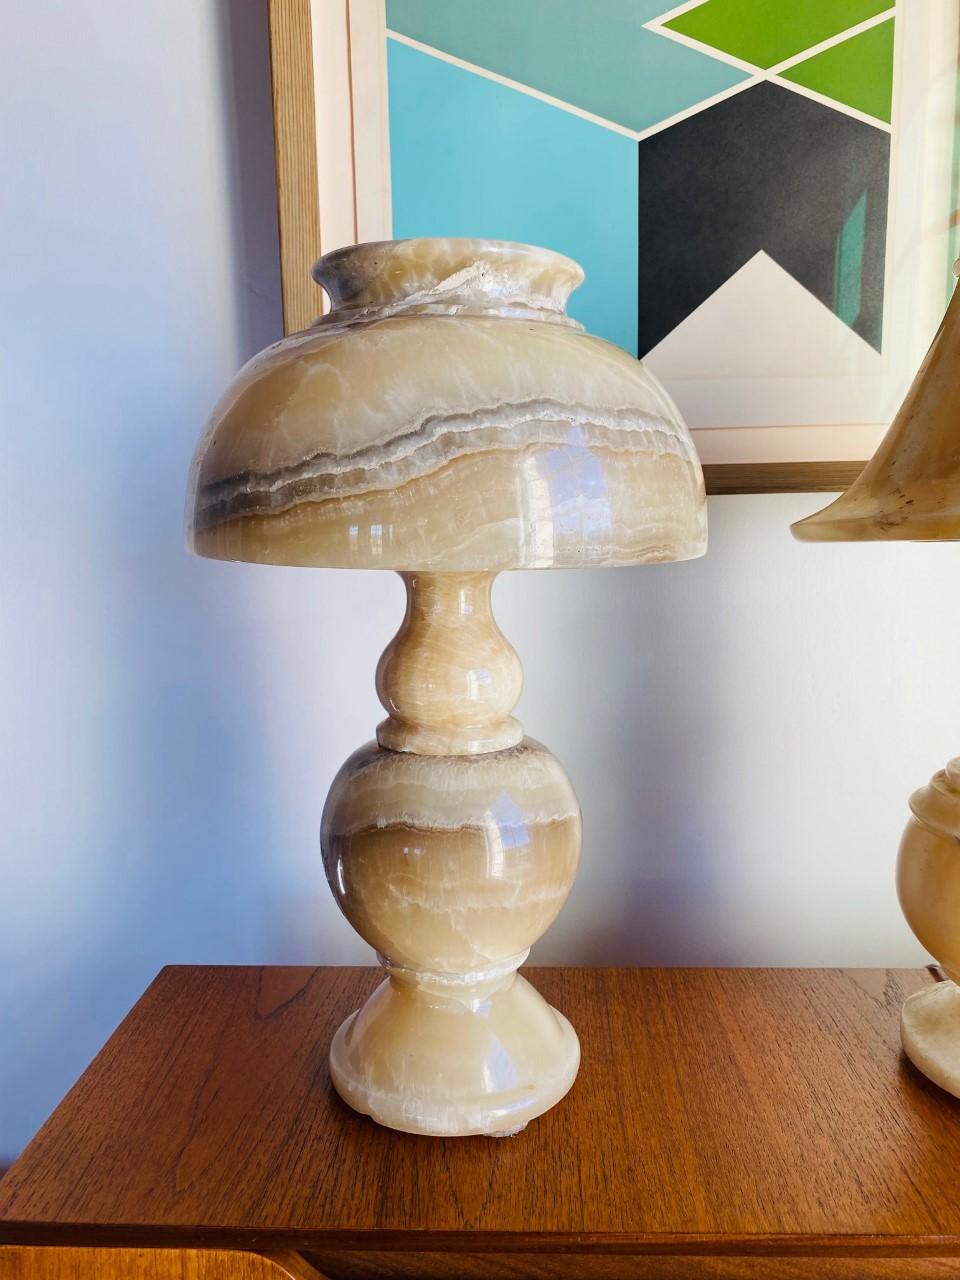 Beautifully carved alabaster marble lamp that is striking and beautiful. This lamp is composed of a marble body and a marble shade and together stand not only as a lamp, but as a sculpture. The classic shapes against the translucent alabaster give